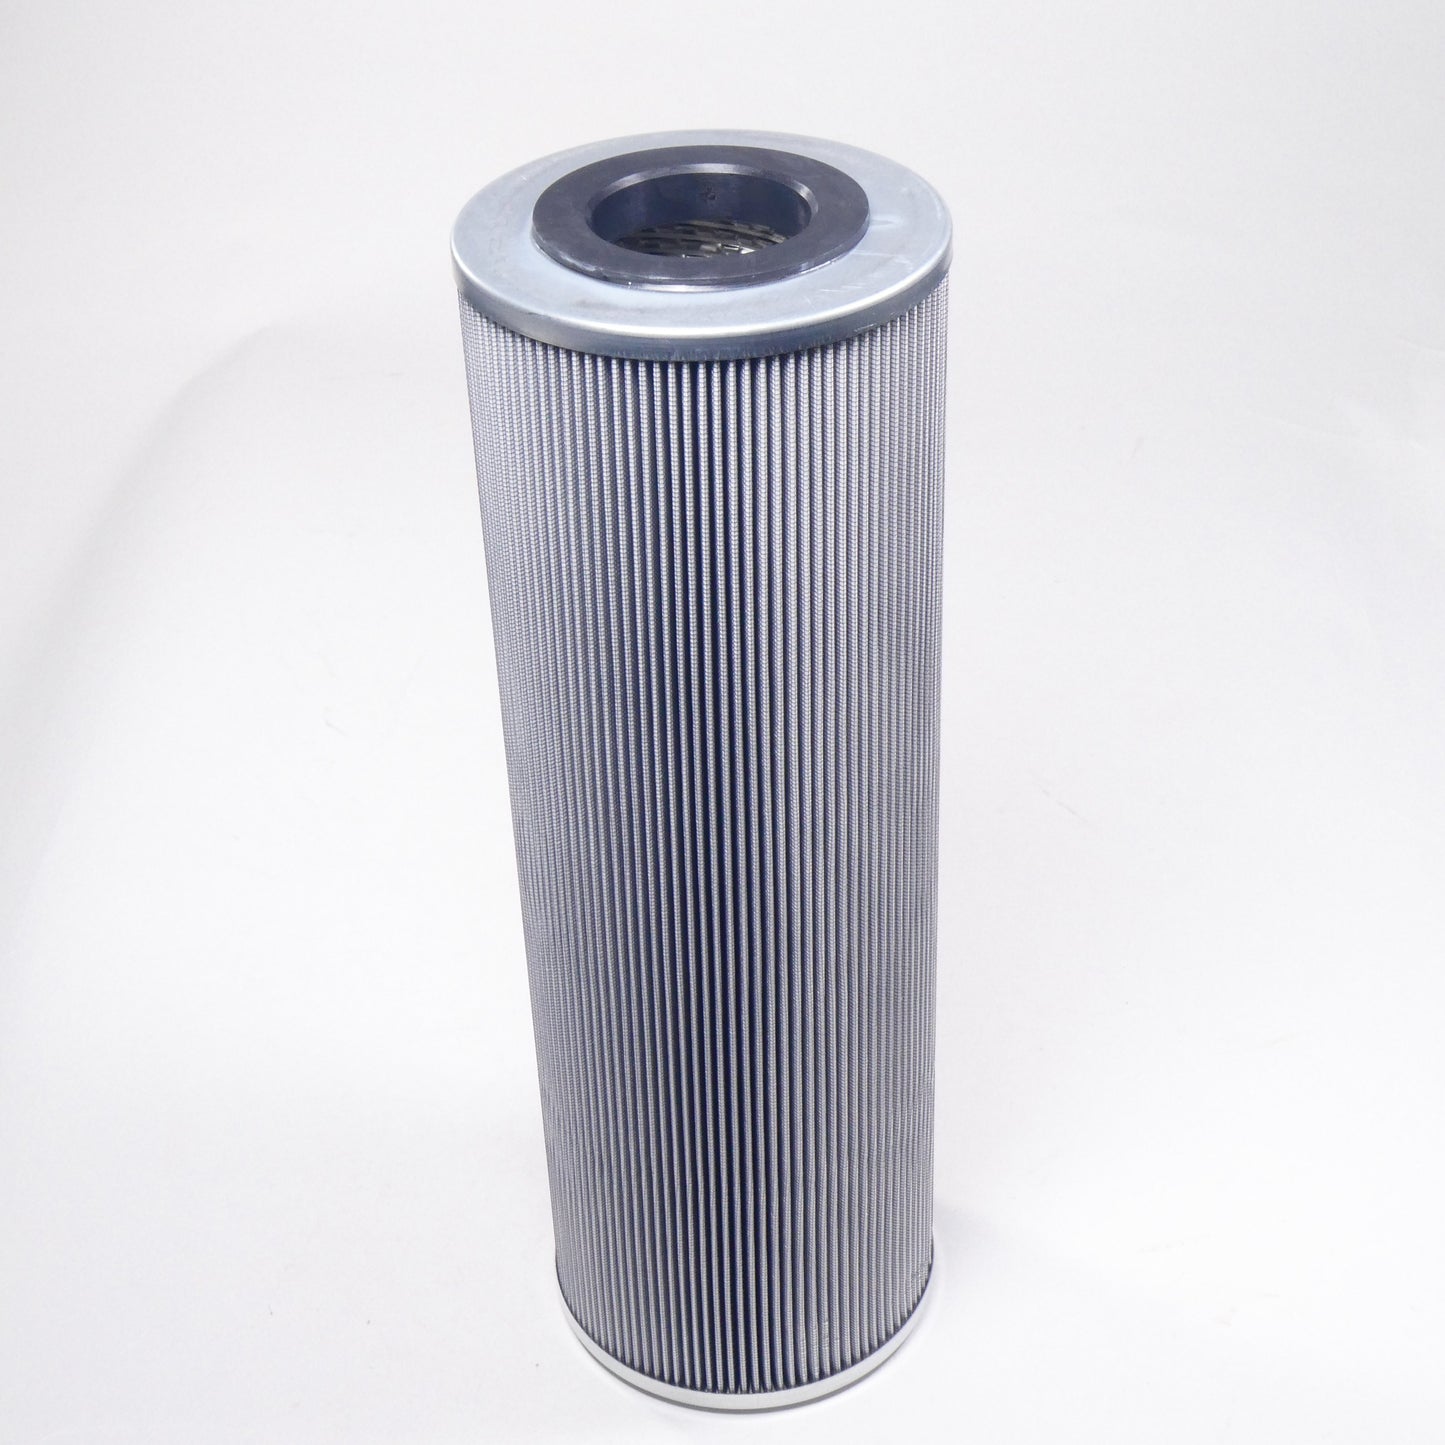 Hydrafil Replacement Filter Element for Hycoa S186-0100-V-1